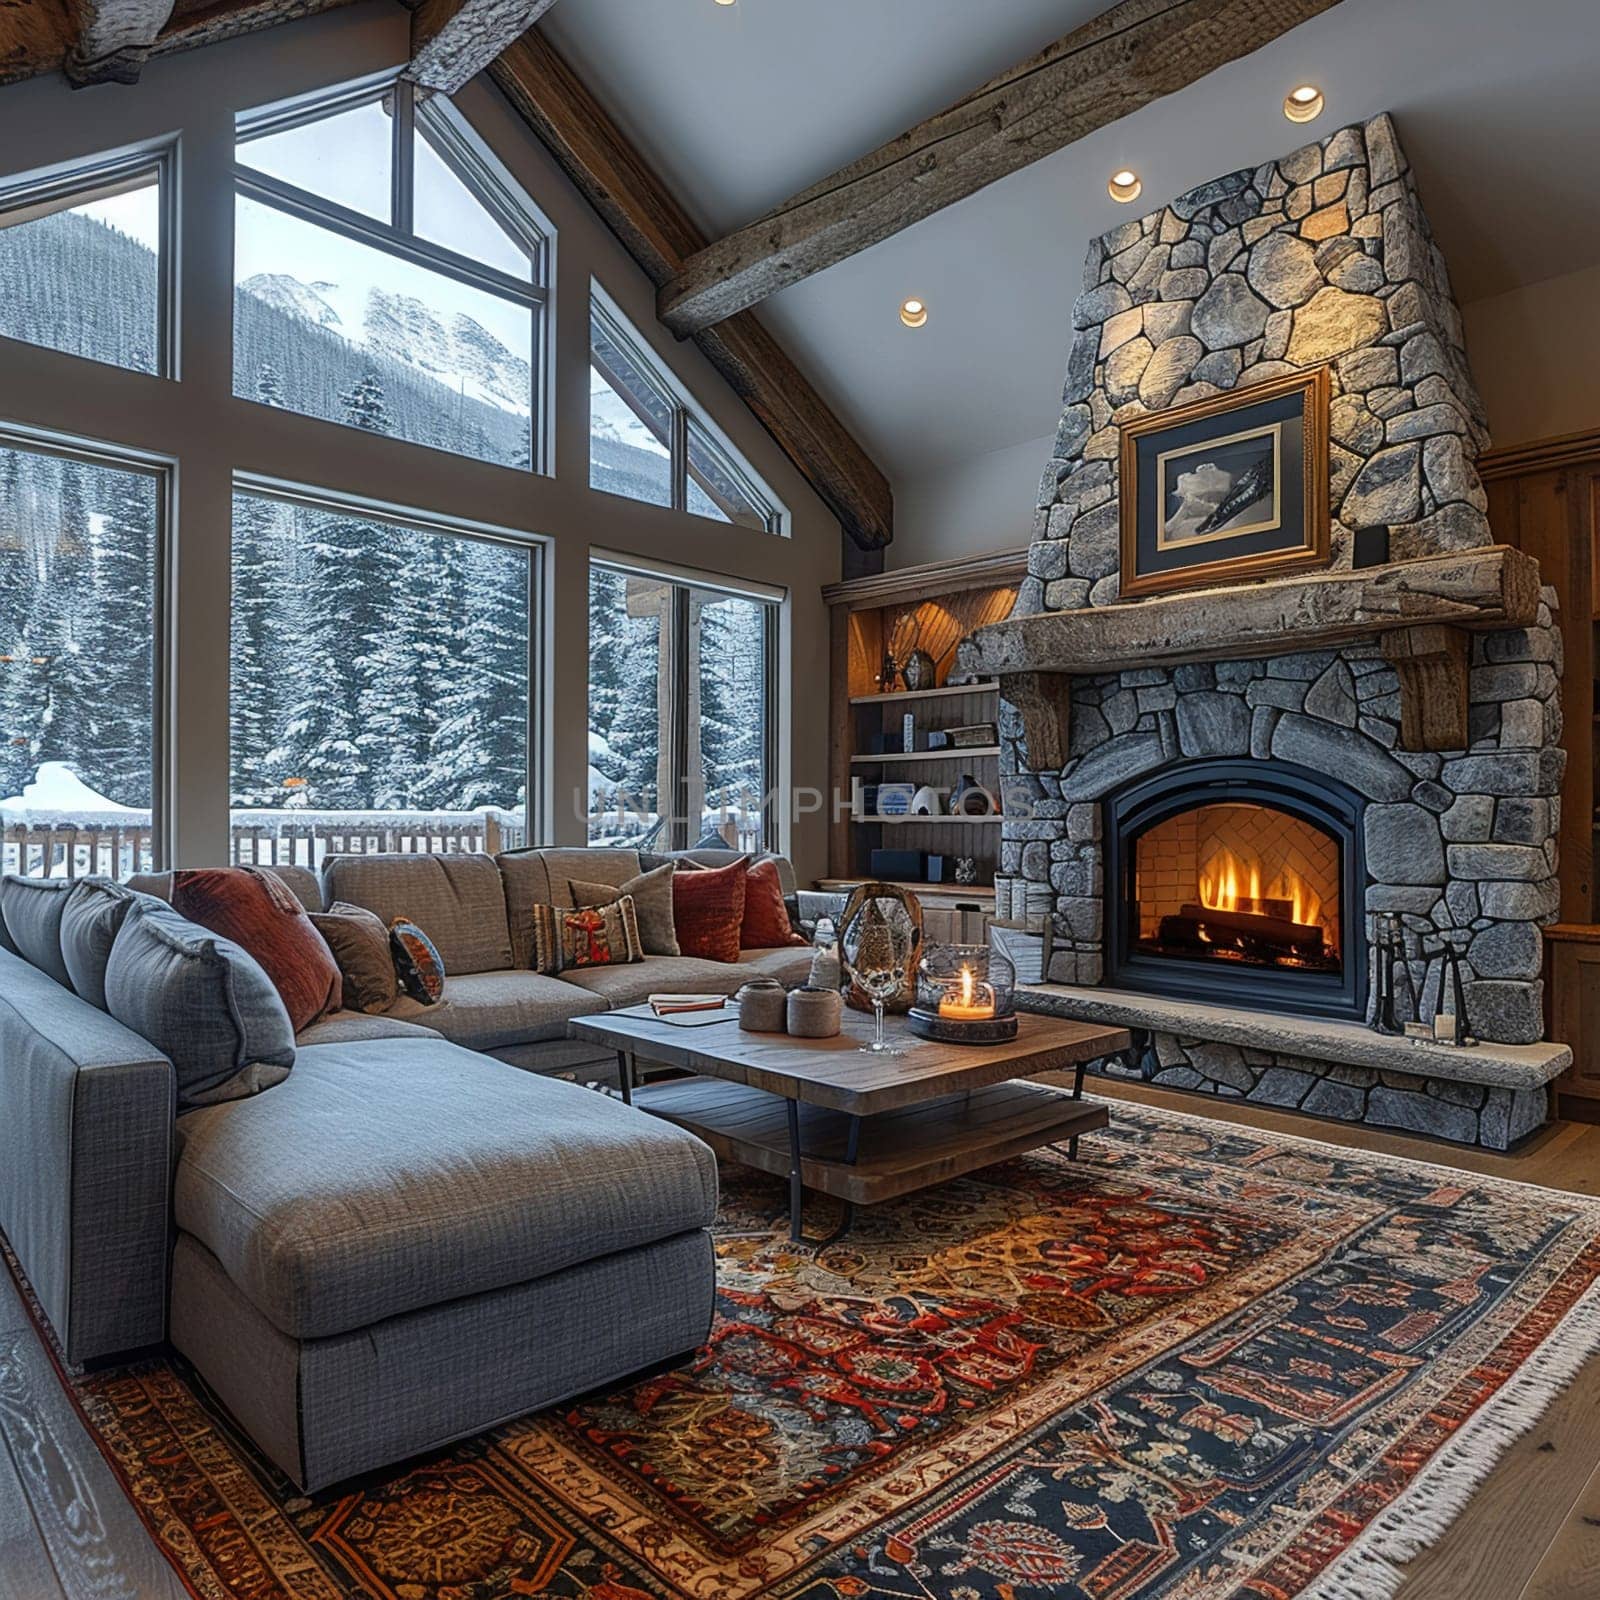 Cozy mountain cabin living room with a stone fireplace and wooden beams.